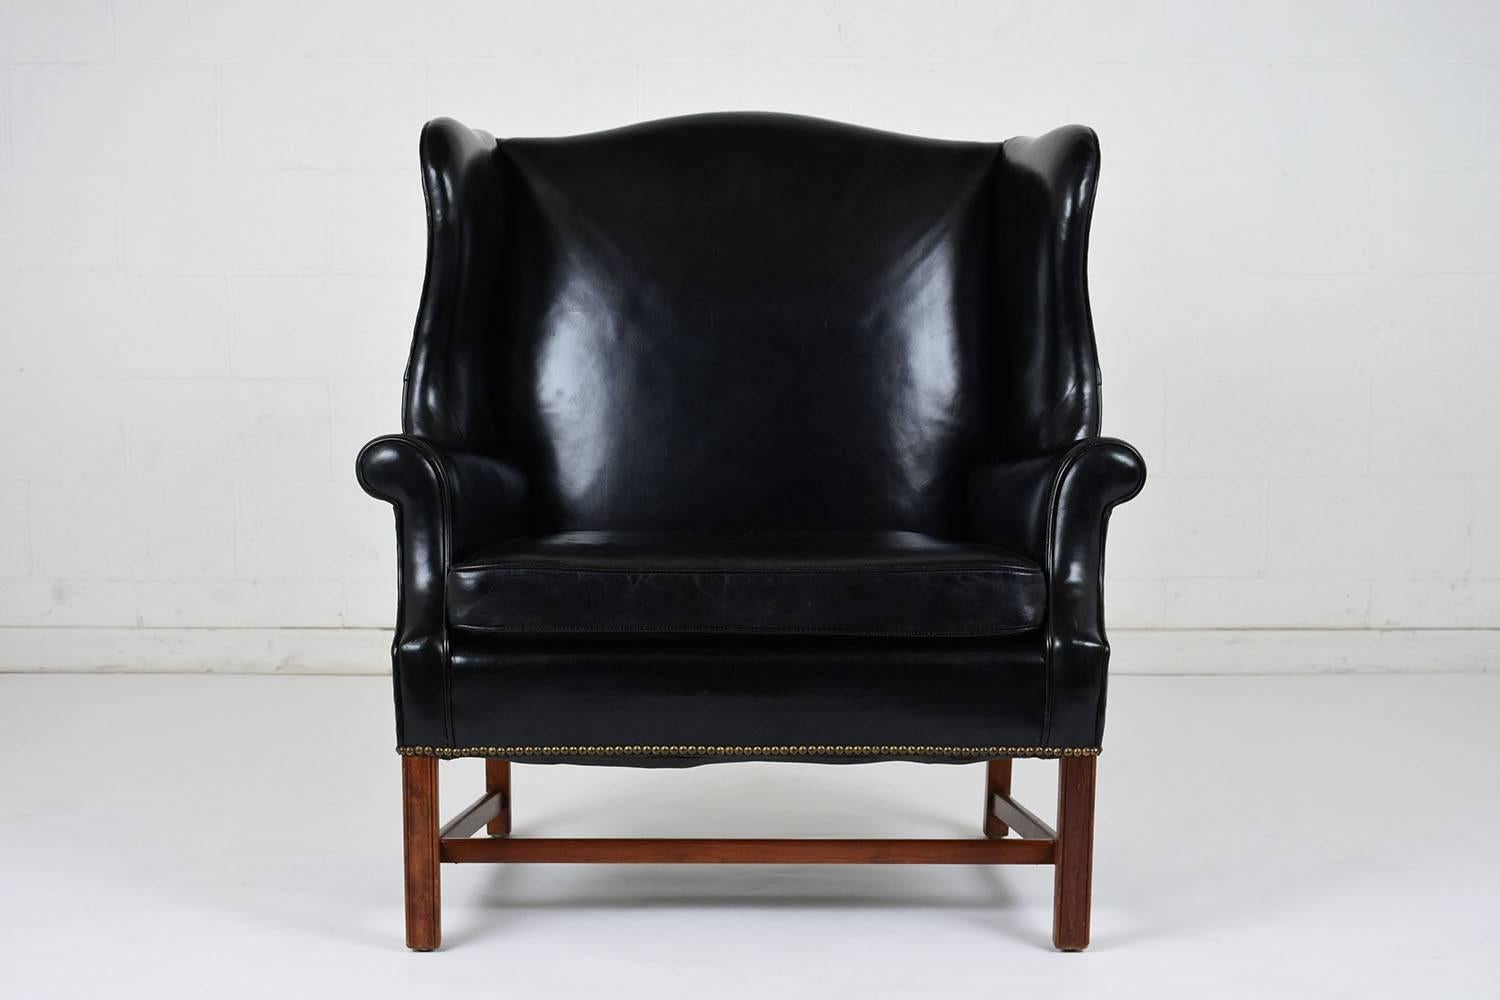 This 1930's English Regency-style wingback chair features an very wide seat and is completely upholstered in the original black color leather with single piping trim details. The curved side wings and top edge flow into the scroll arm rests. The